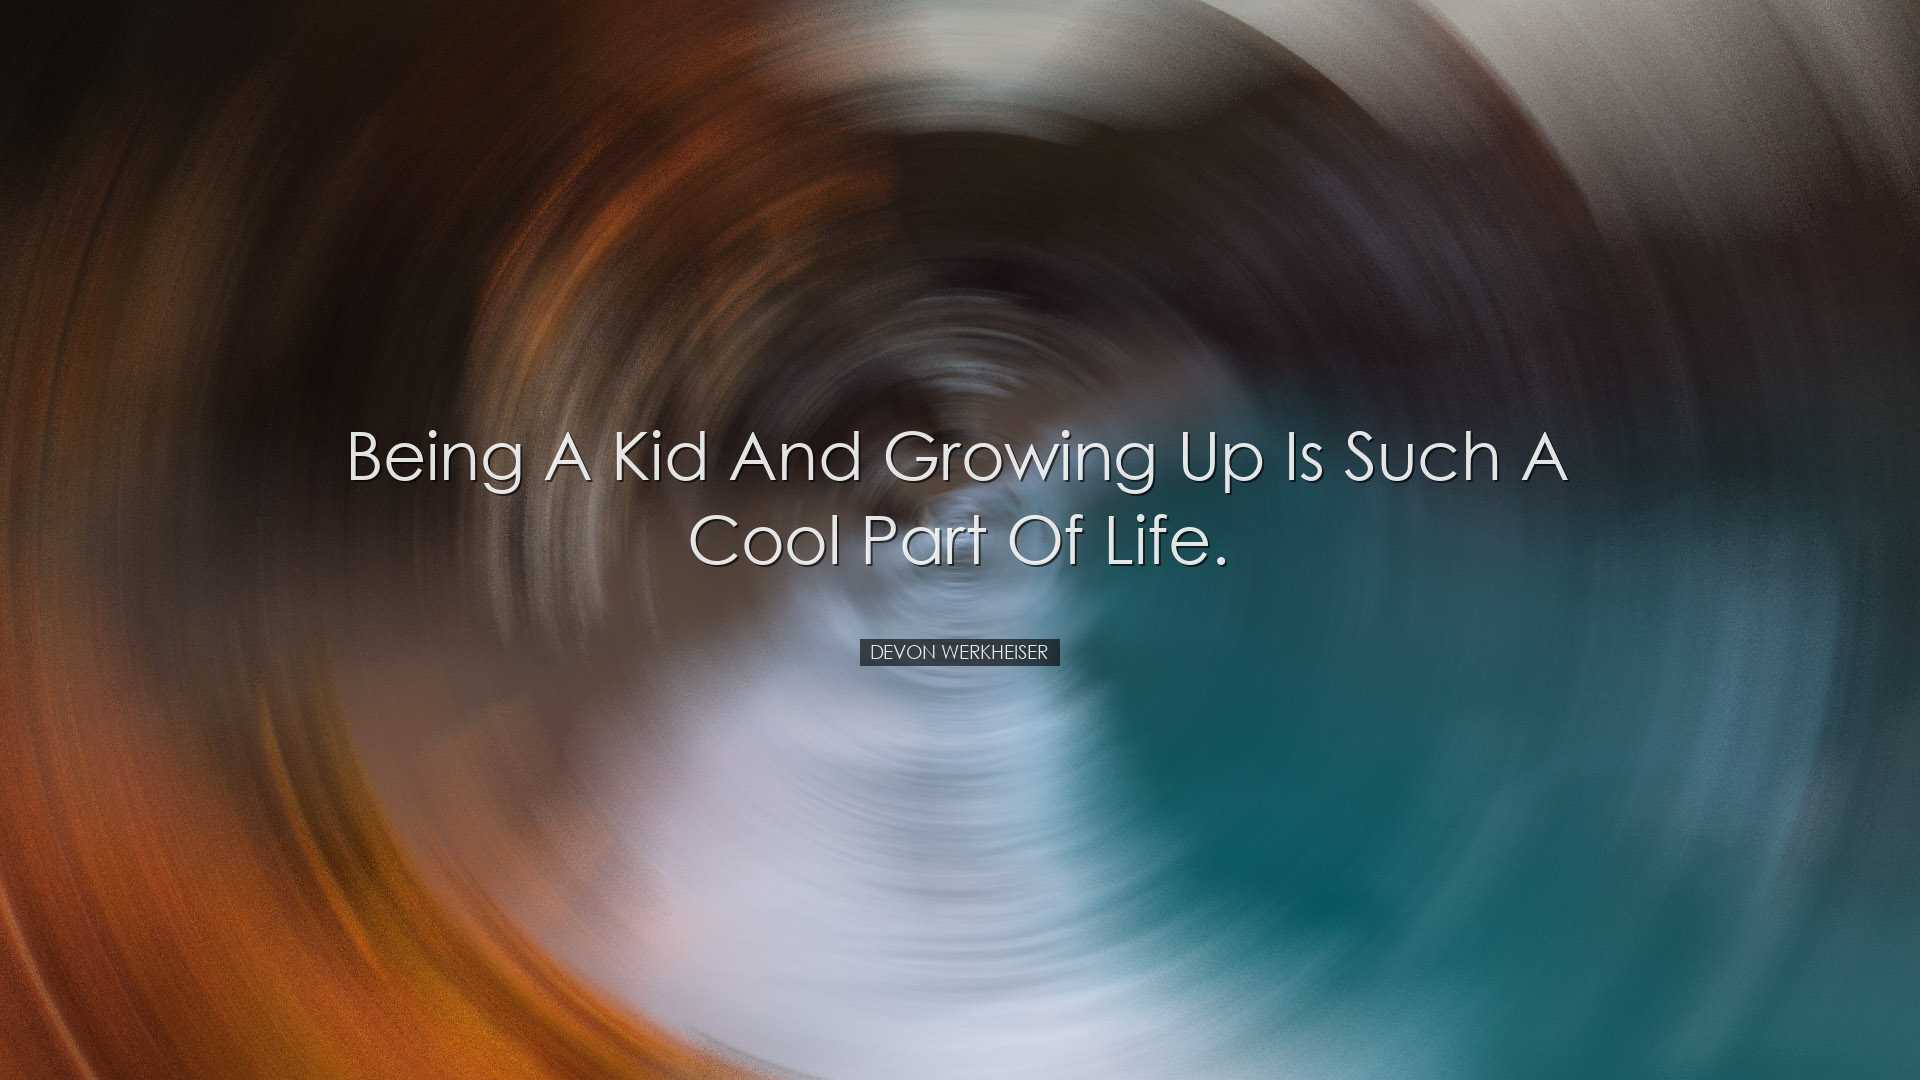 Being a kid and growing up is such a cool part of life. - Devon We